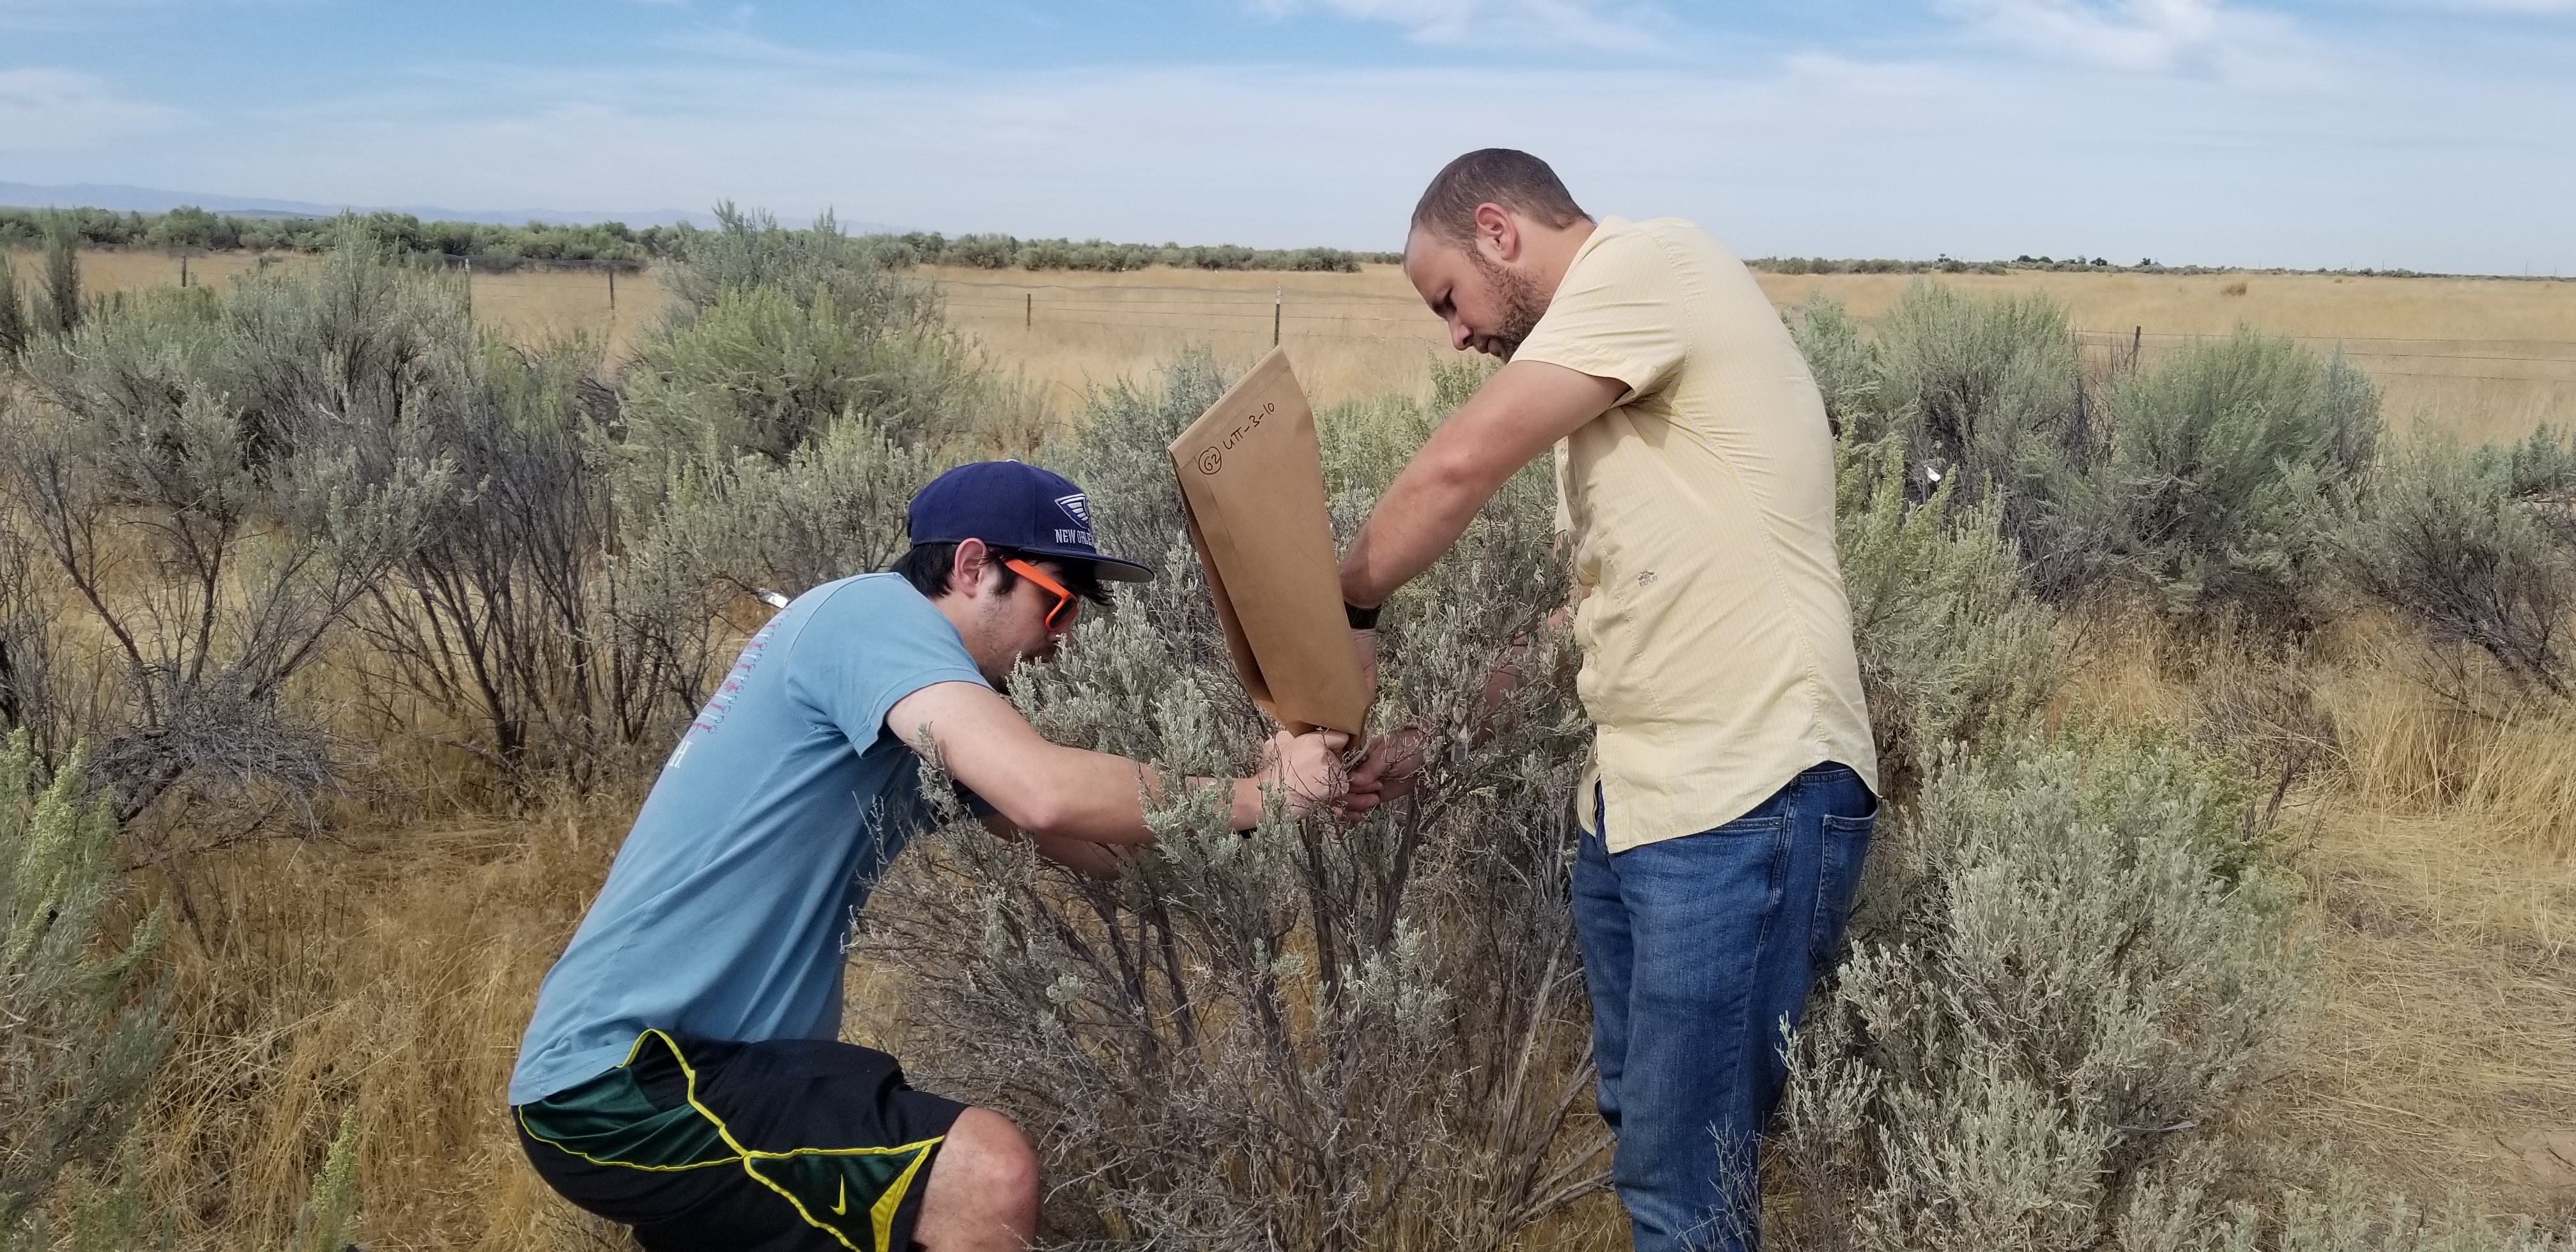 Two men outside are putting a bag over a sagebrush to collect a sample.